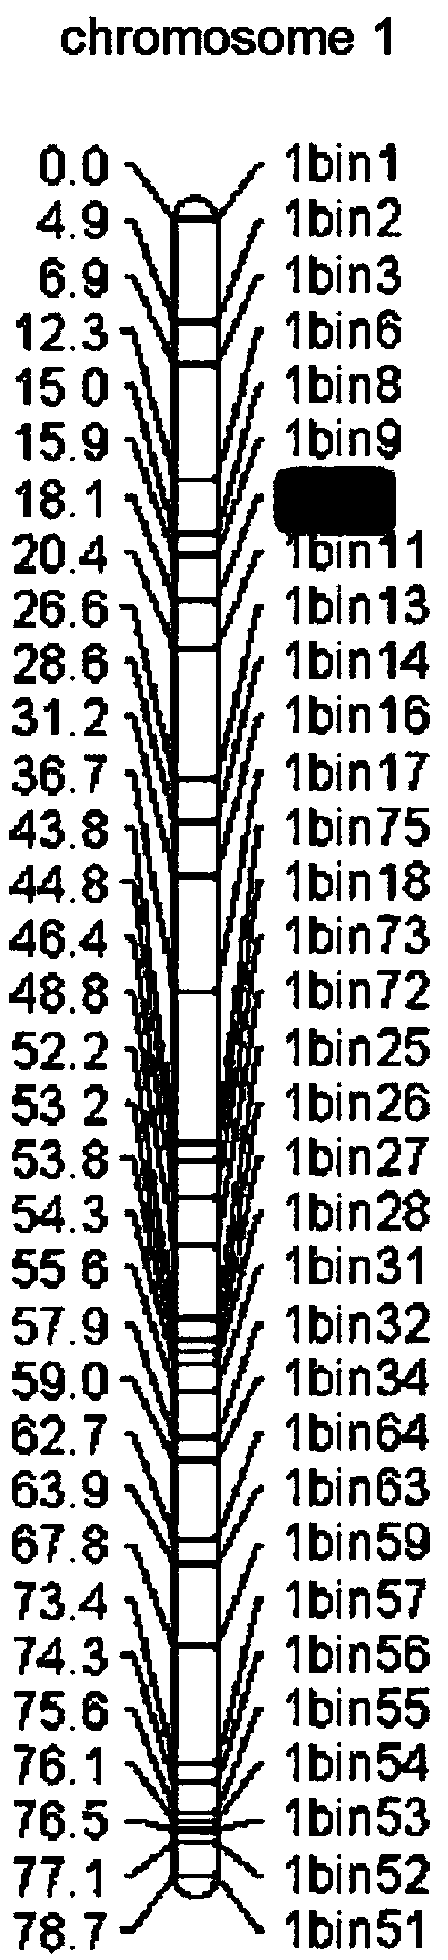 SNP (single nucleotide polymorphism) site and CAPS (cleaved amplified polymorphic sequence) mark interlocked with citrullus lanatus fruit bitter taste gene Bt (bitterness)